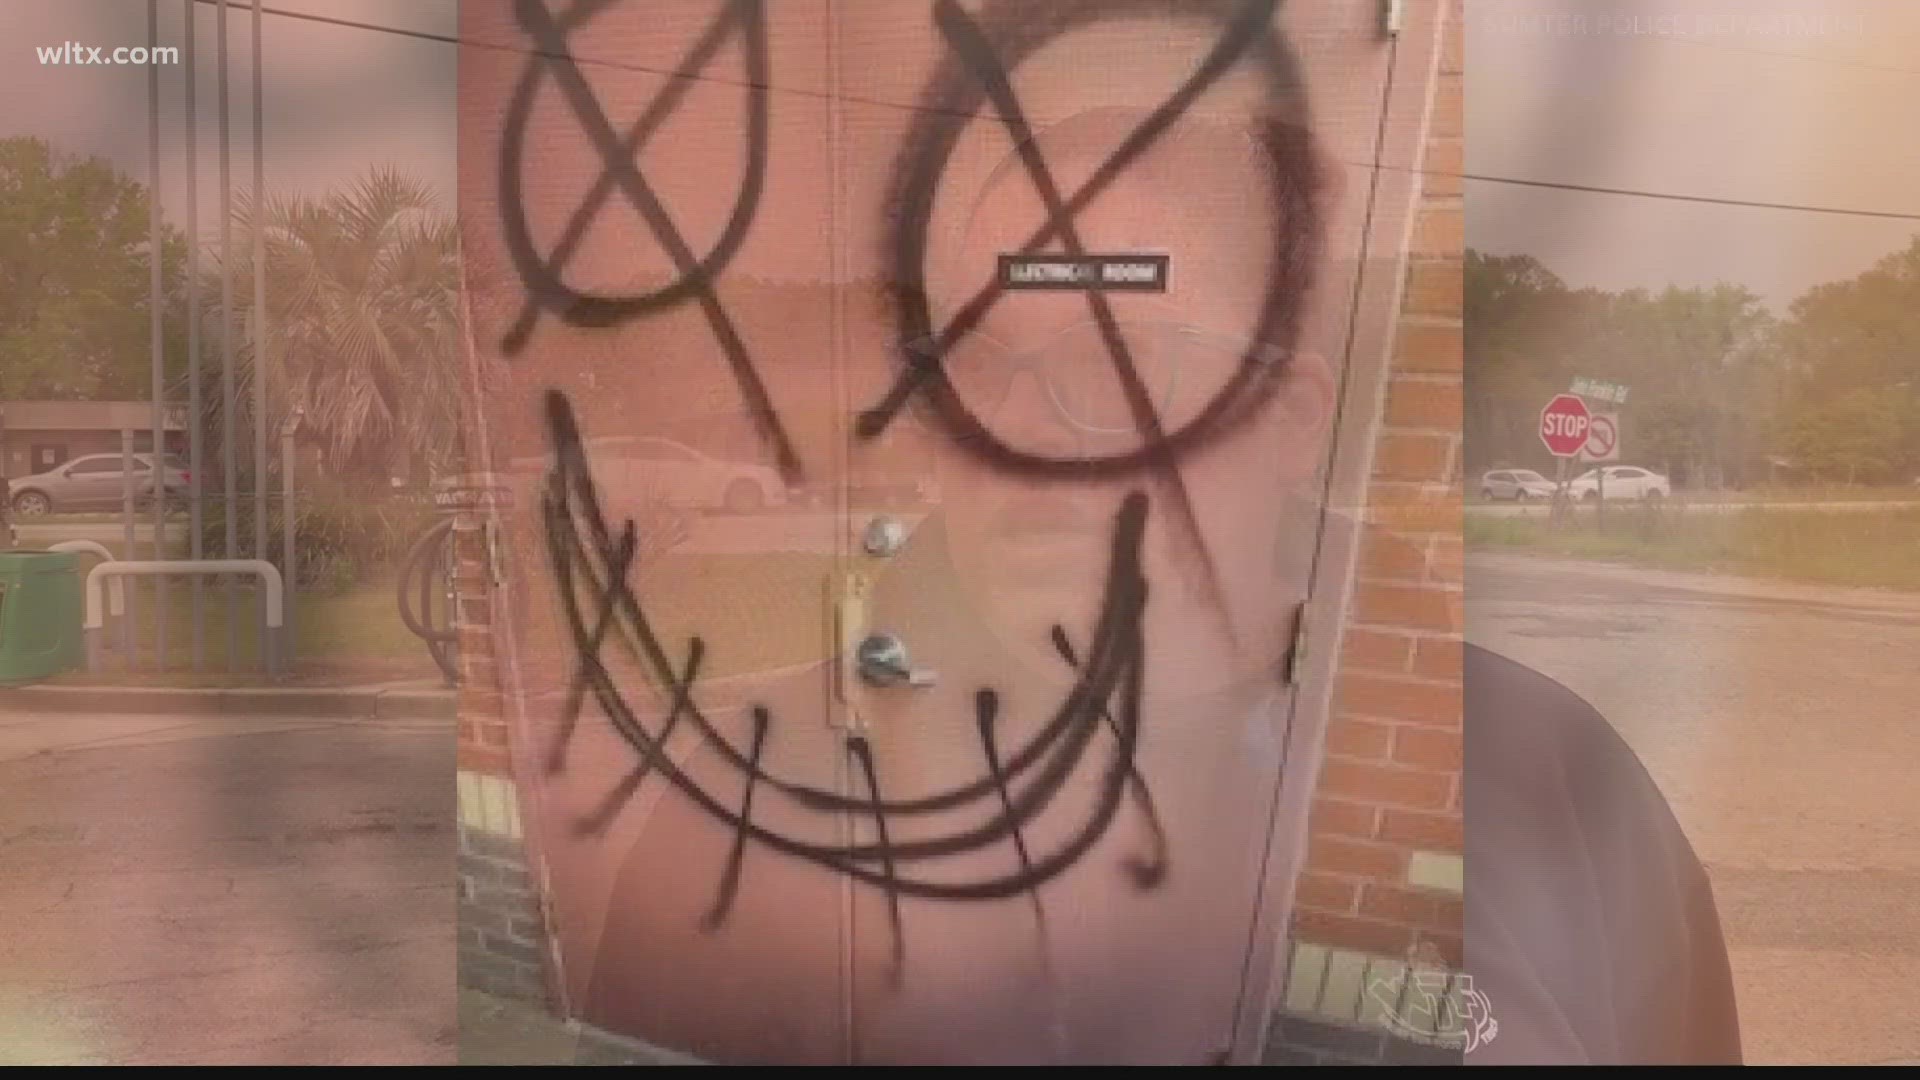 Patriot Park in Sumter was recently vandalized to the tune of almost $100K.